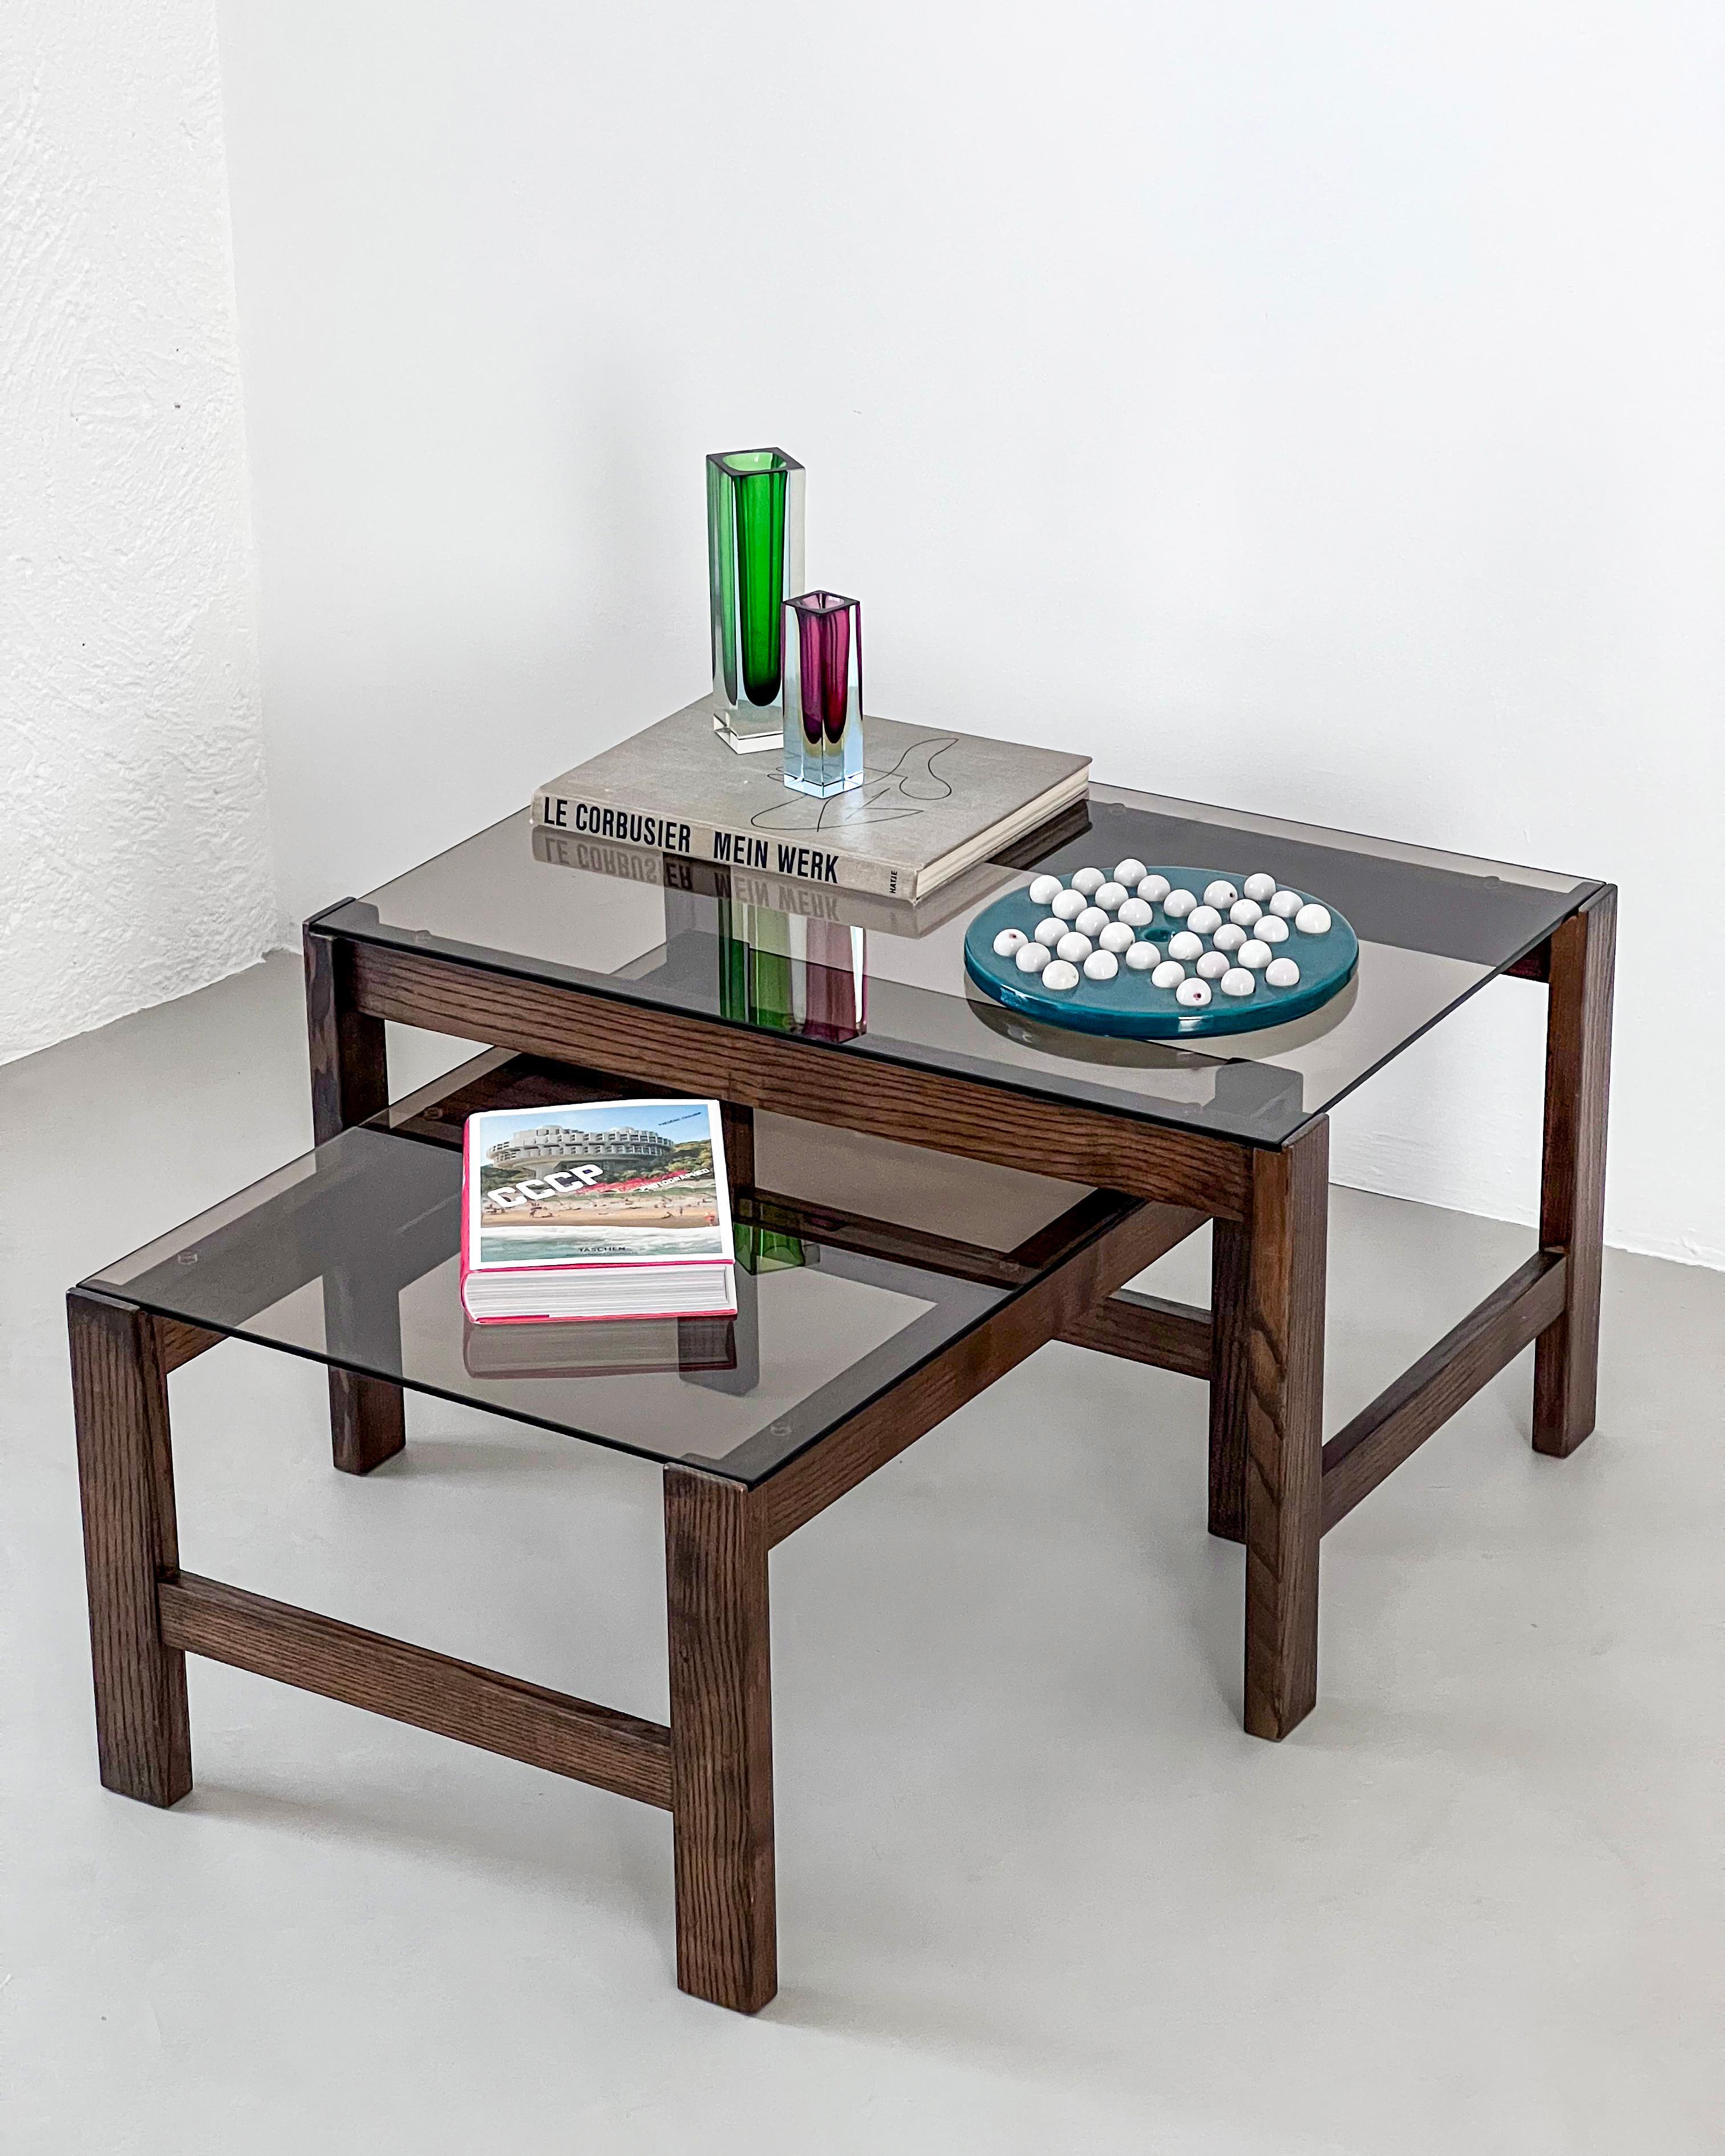 Mid-Century Modern Nesting Coffee Tables, Wood and Glass, Living Room Decorative In Good Condition For Sale In Milan, IT